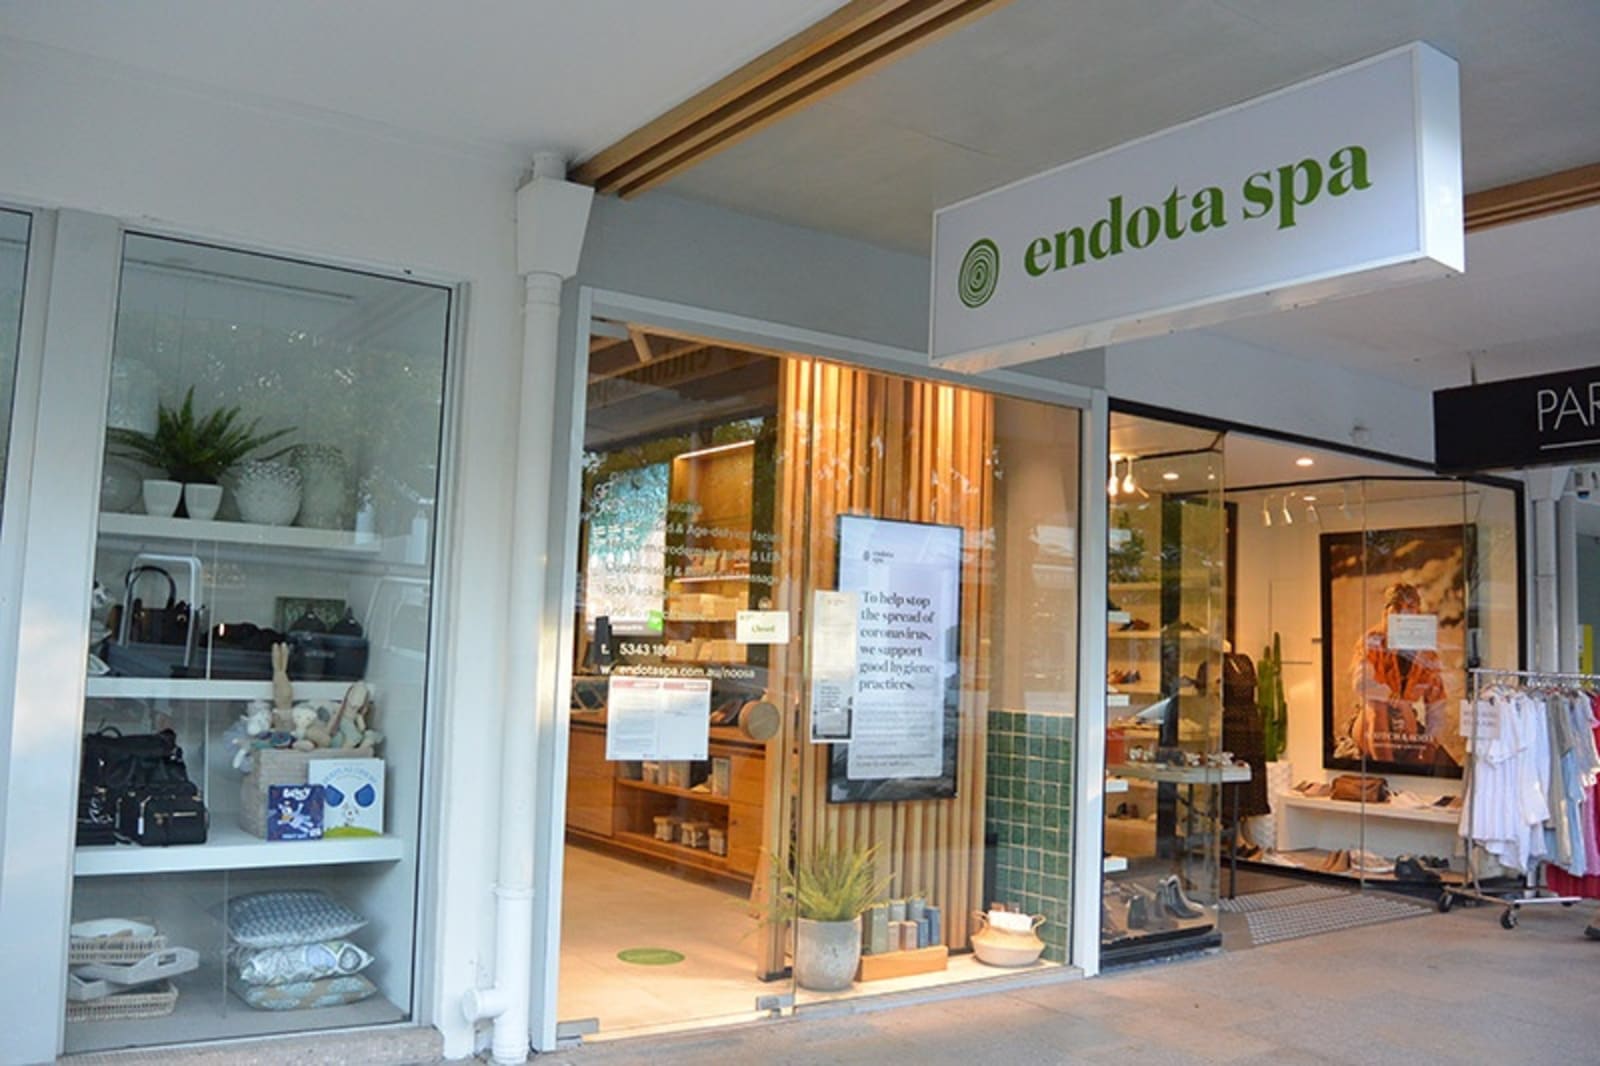 A store with a sign out the front that says endota spa